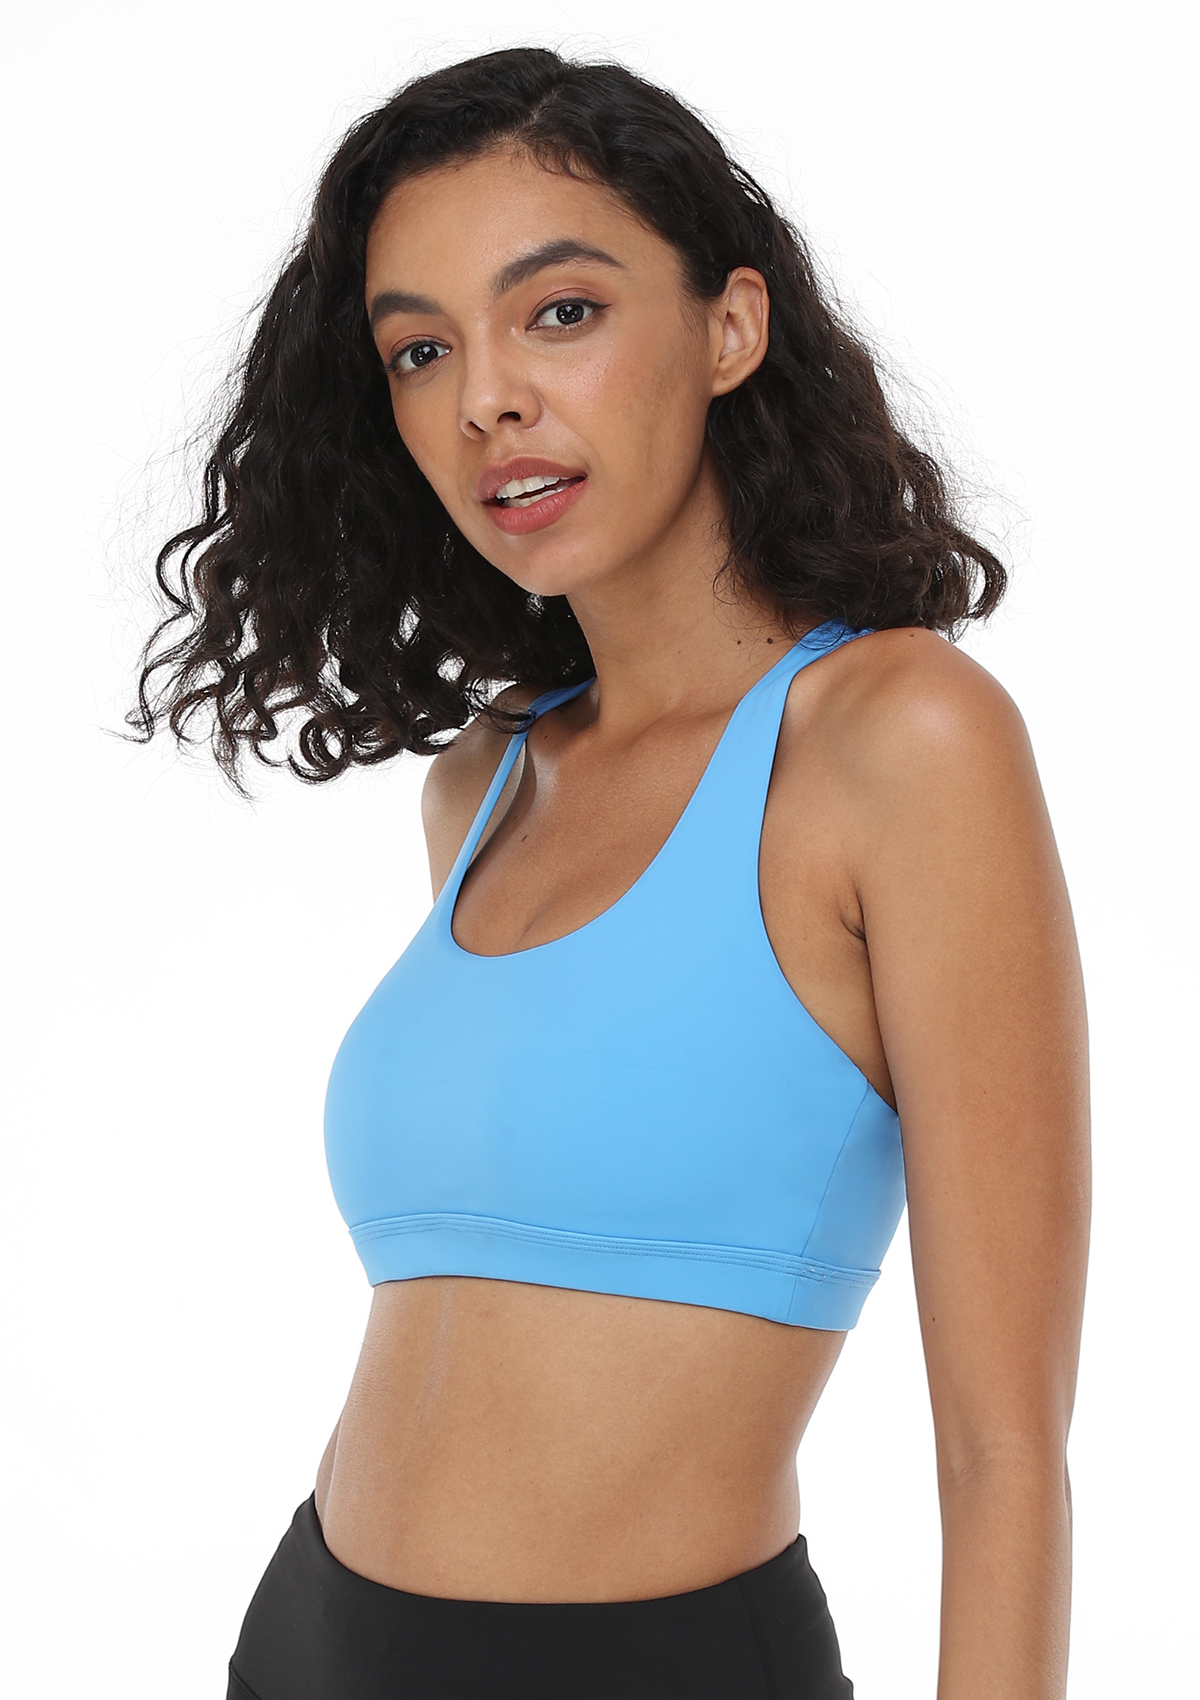 Sports Bras: A Guide to Choosing the Right Support for Your Workout